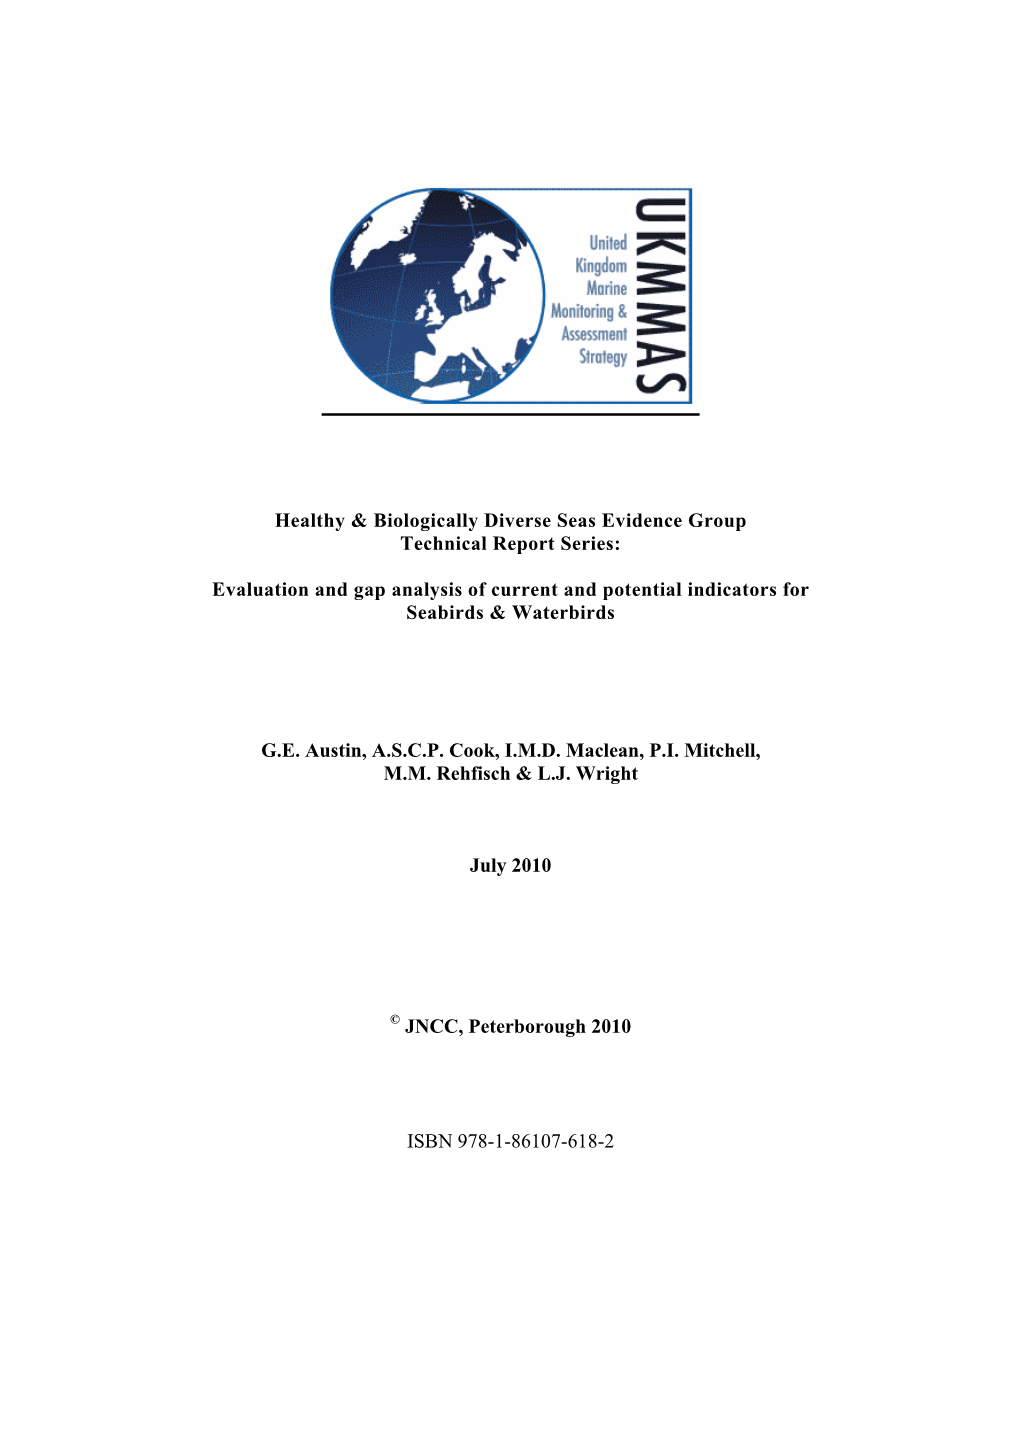 Healthy & Biologically Diverse Seas Evidence Group Technical Report